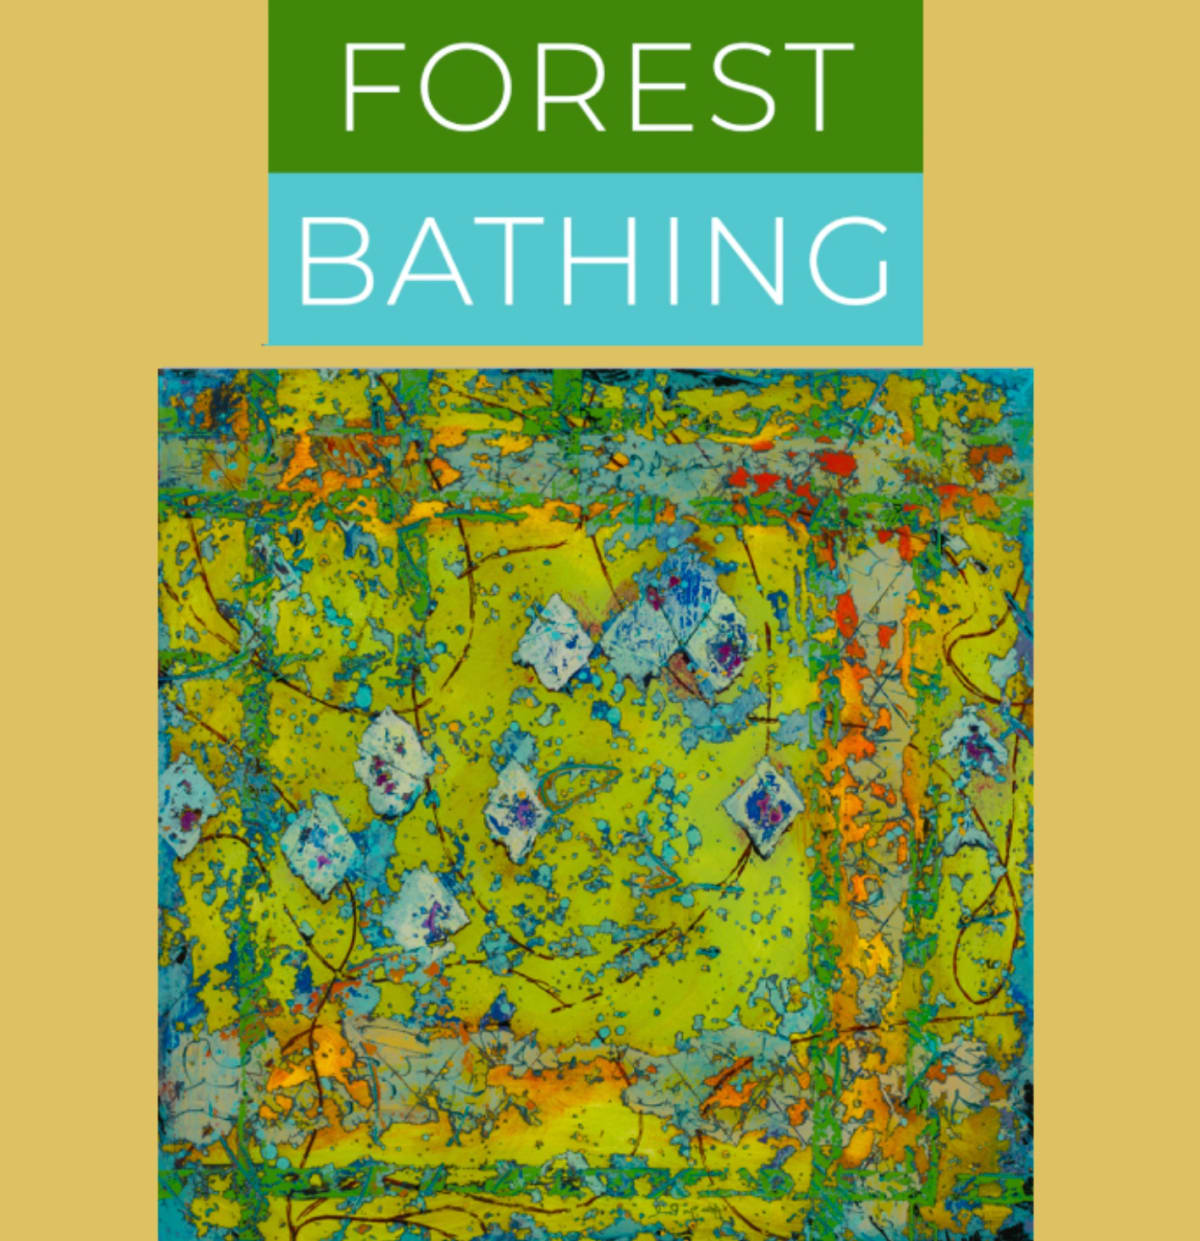 The Byrdcliffe Forum presents the Forest Bathing Artist Panel